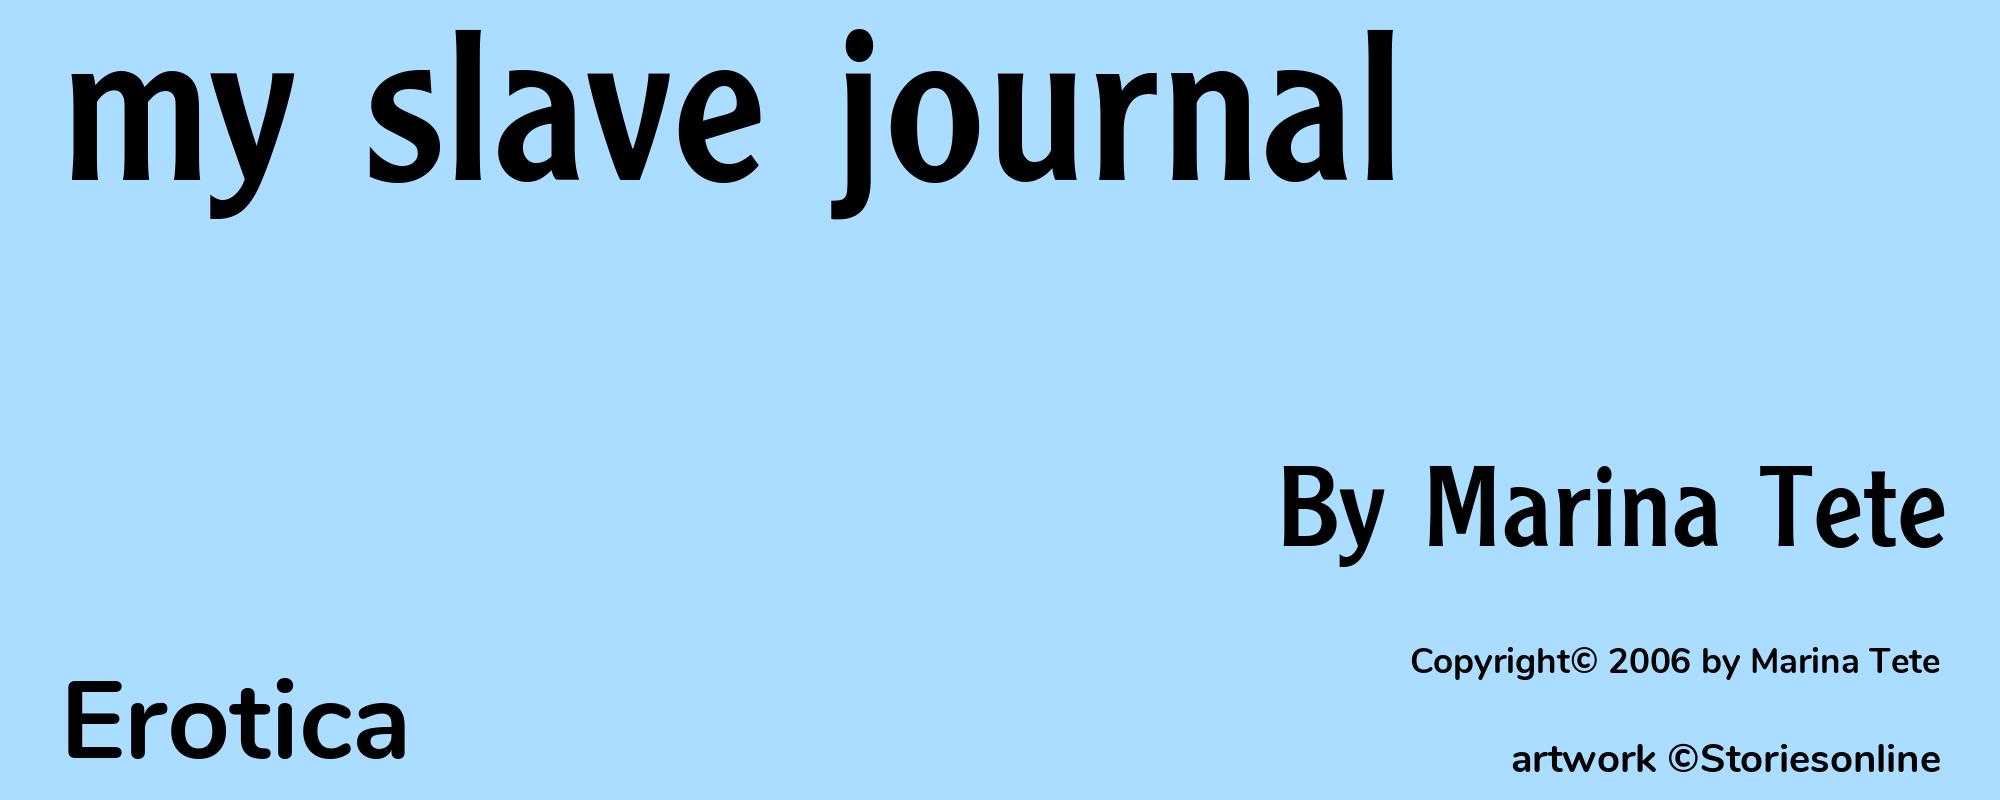 my slave journal - Cover